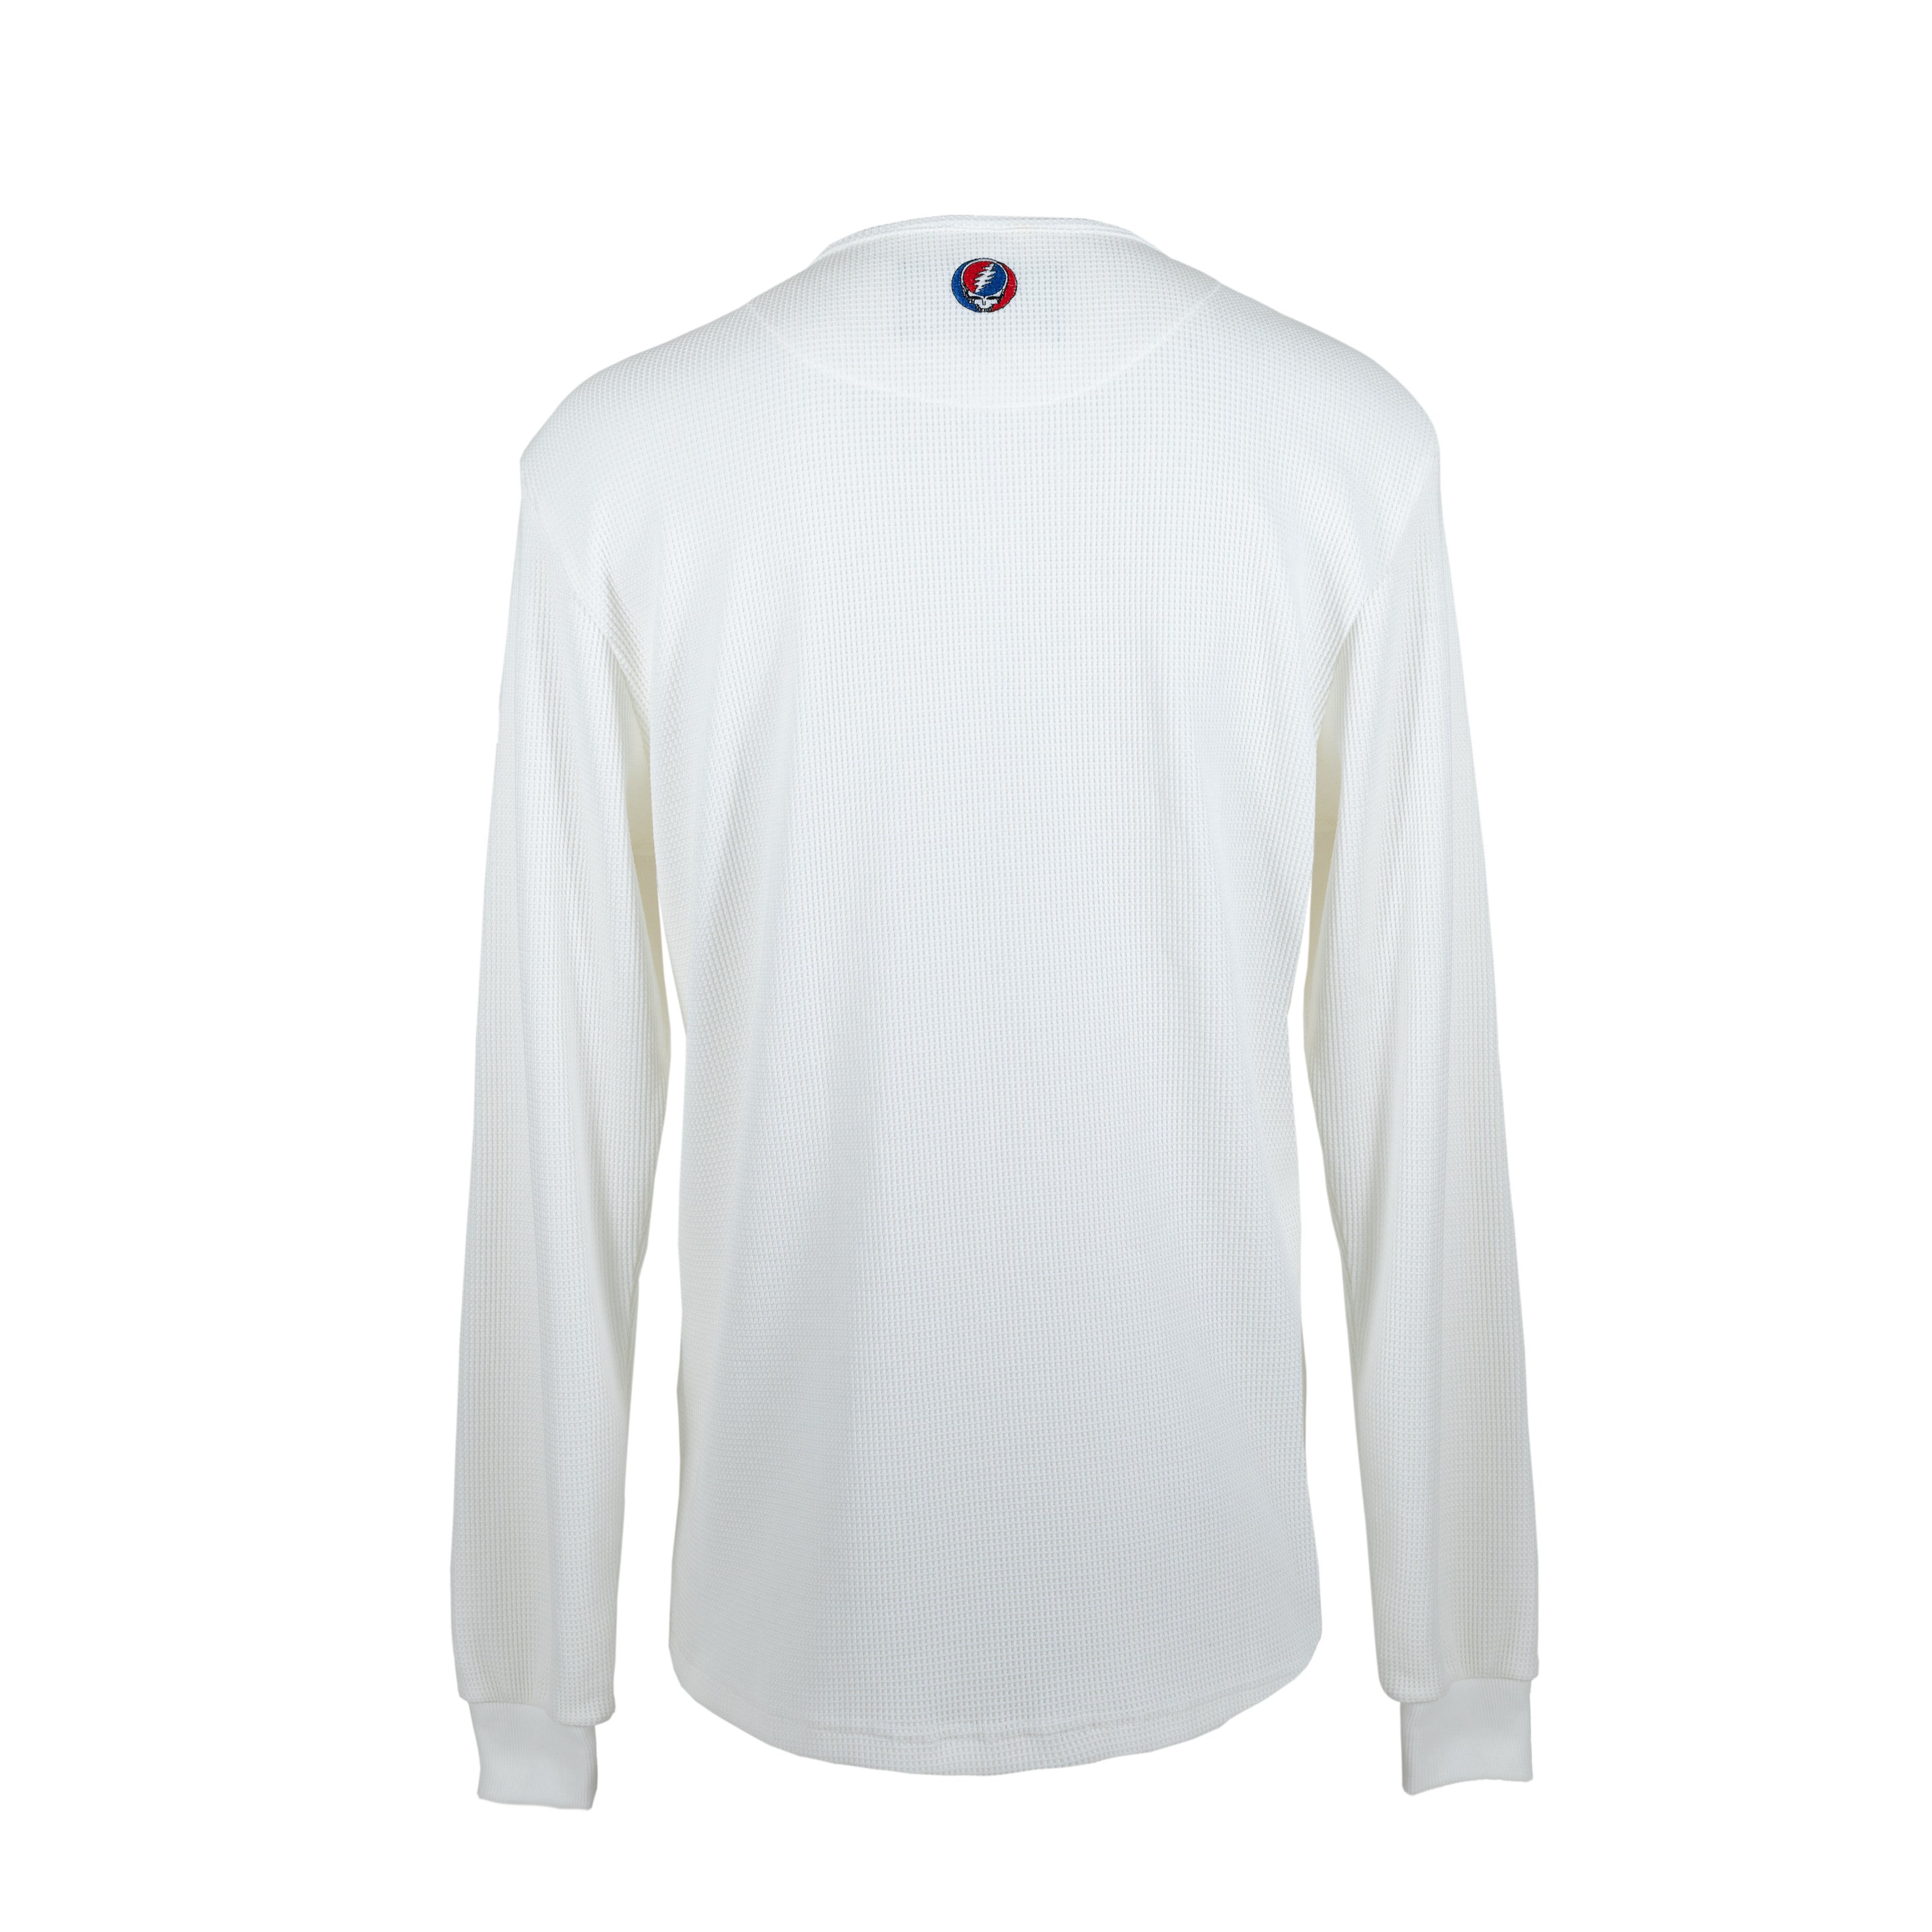 Grateful Dead White Steal Your Face Henley - Section 119